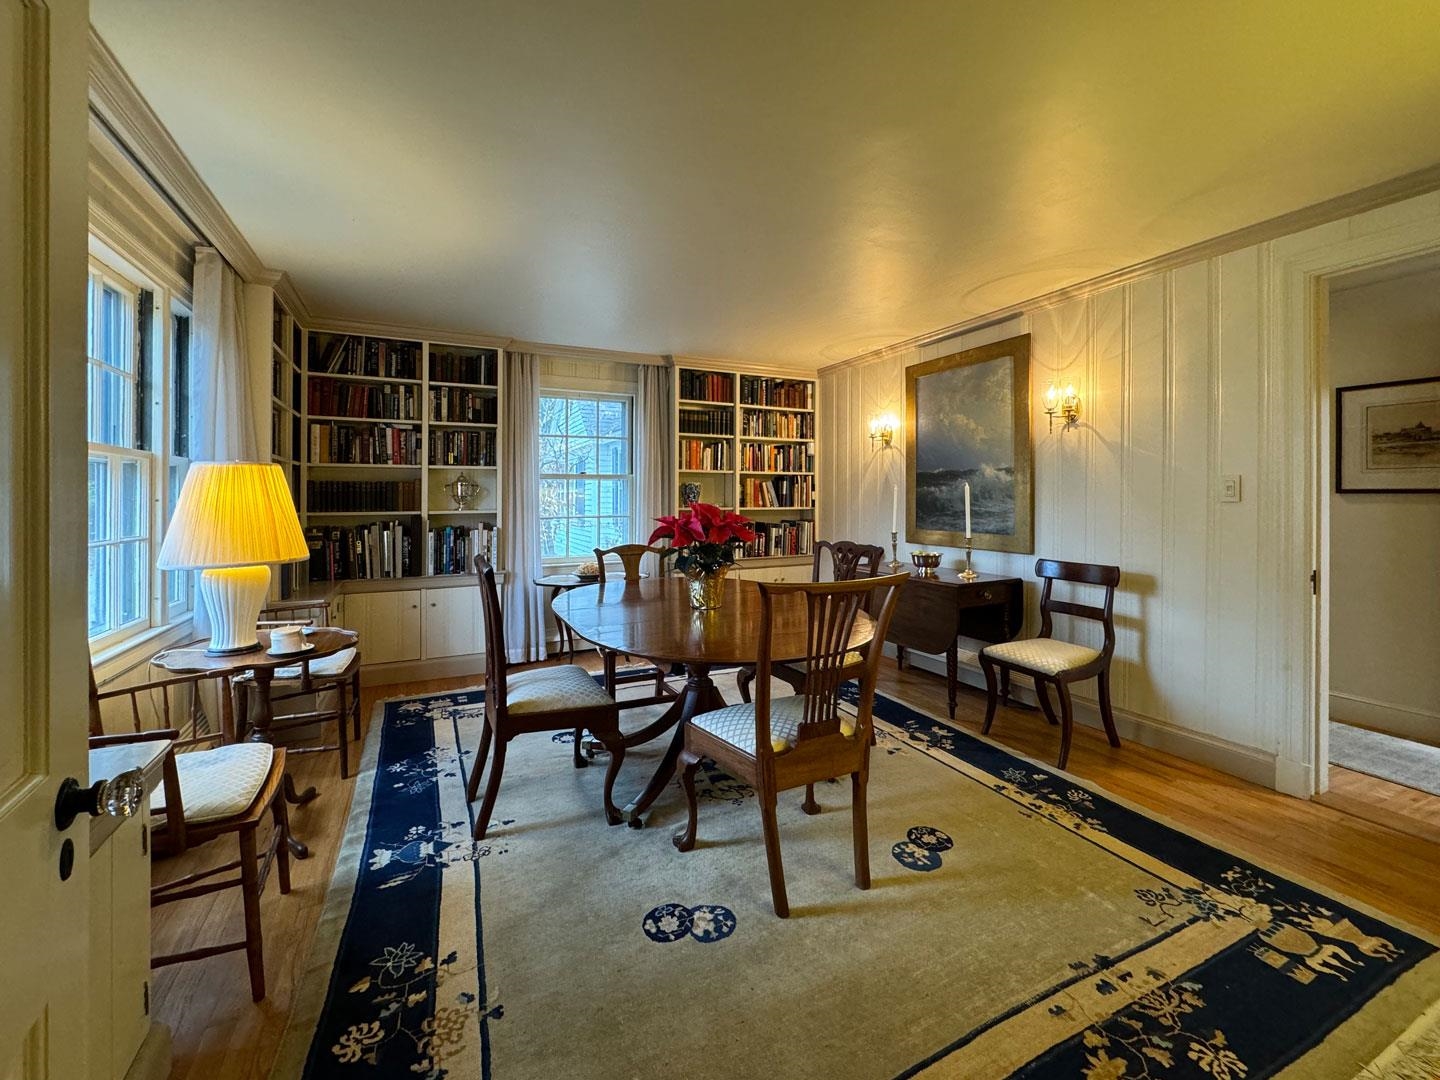 Stunning formal dining room with built-in bookcases and large windows